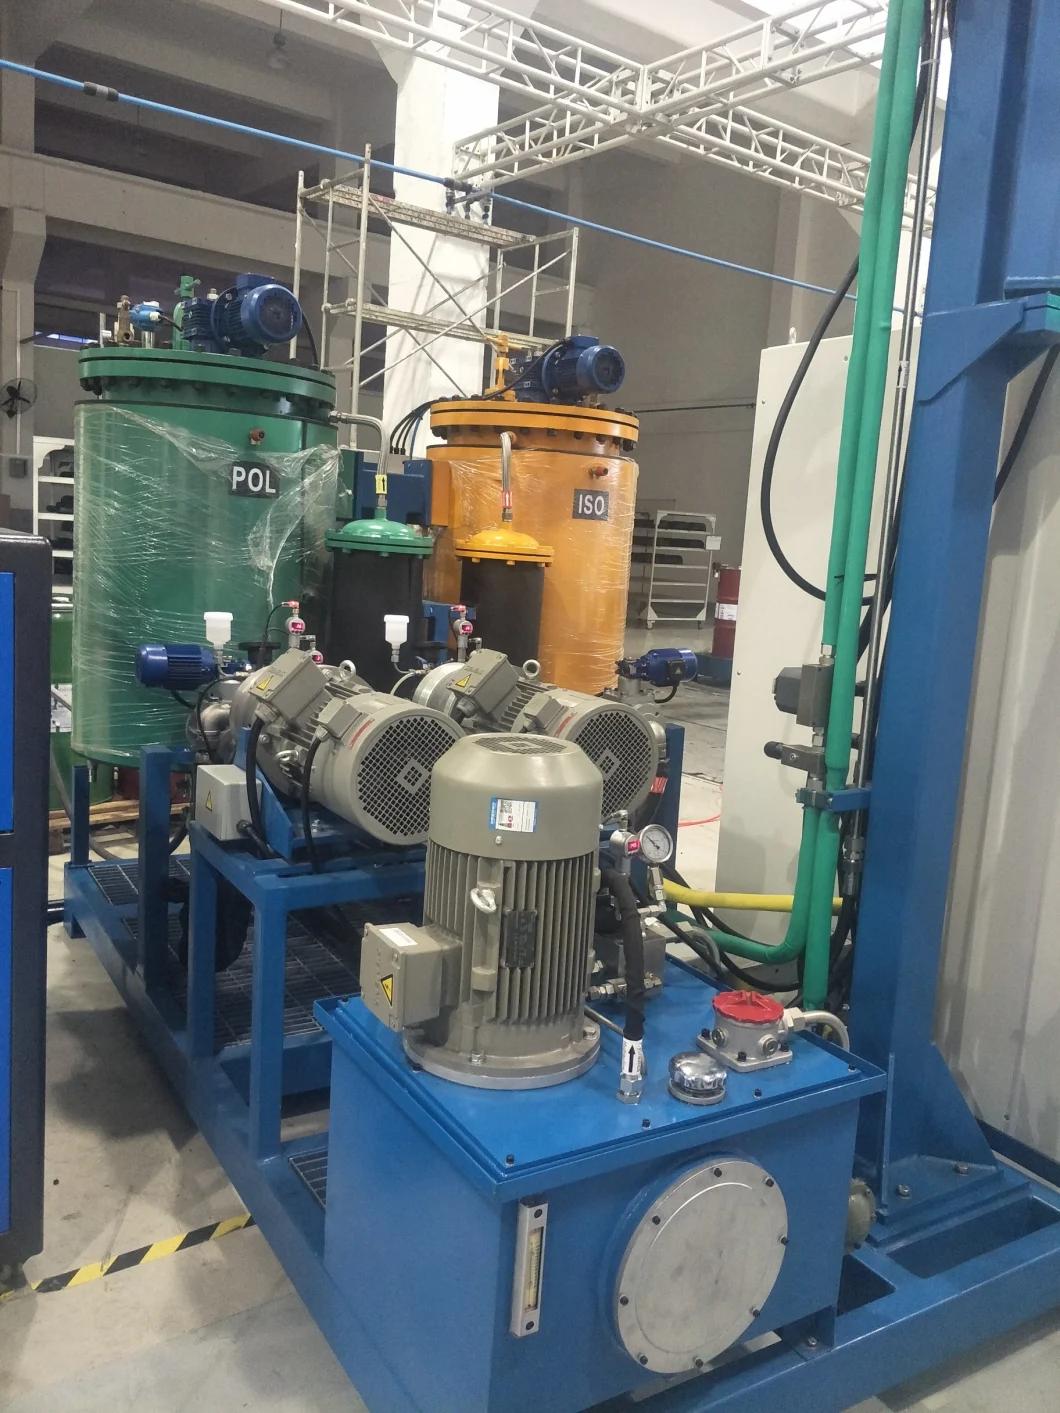 PU Foam Injection Machine with 12 Pump for Disinfection Cabinet Production Line